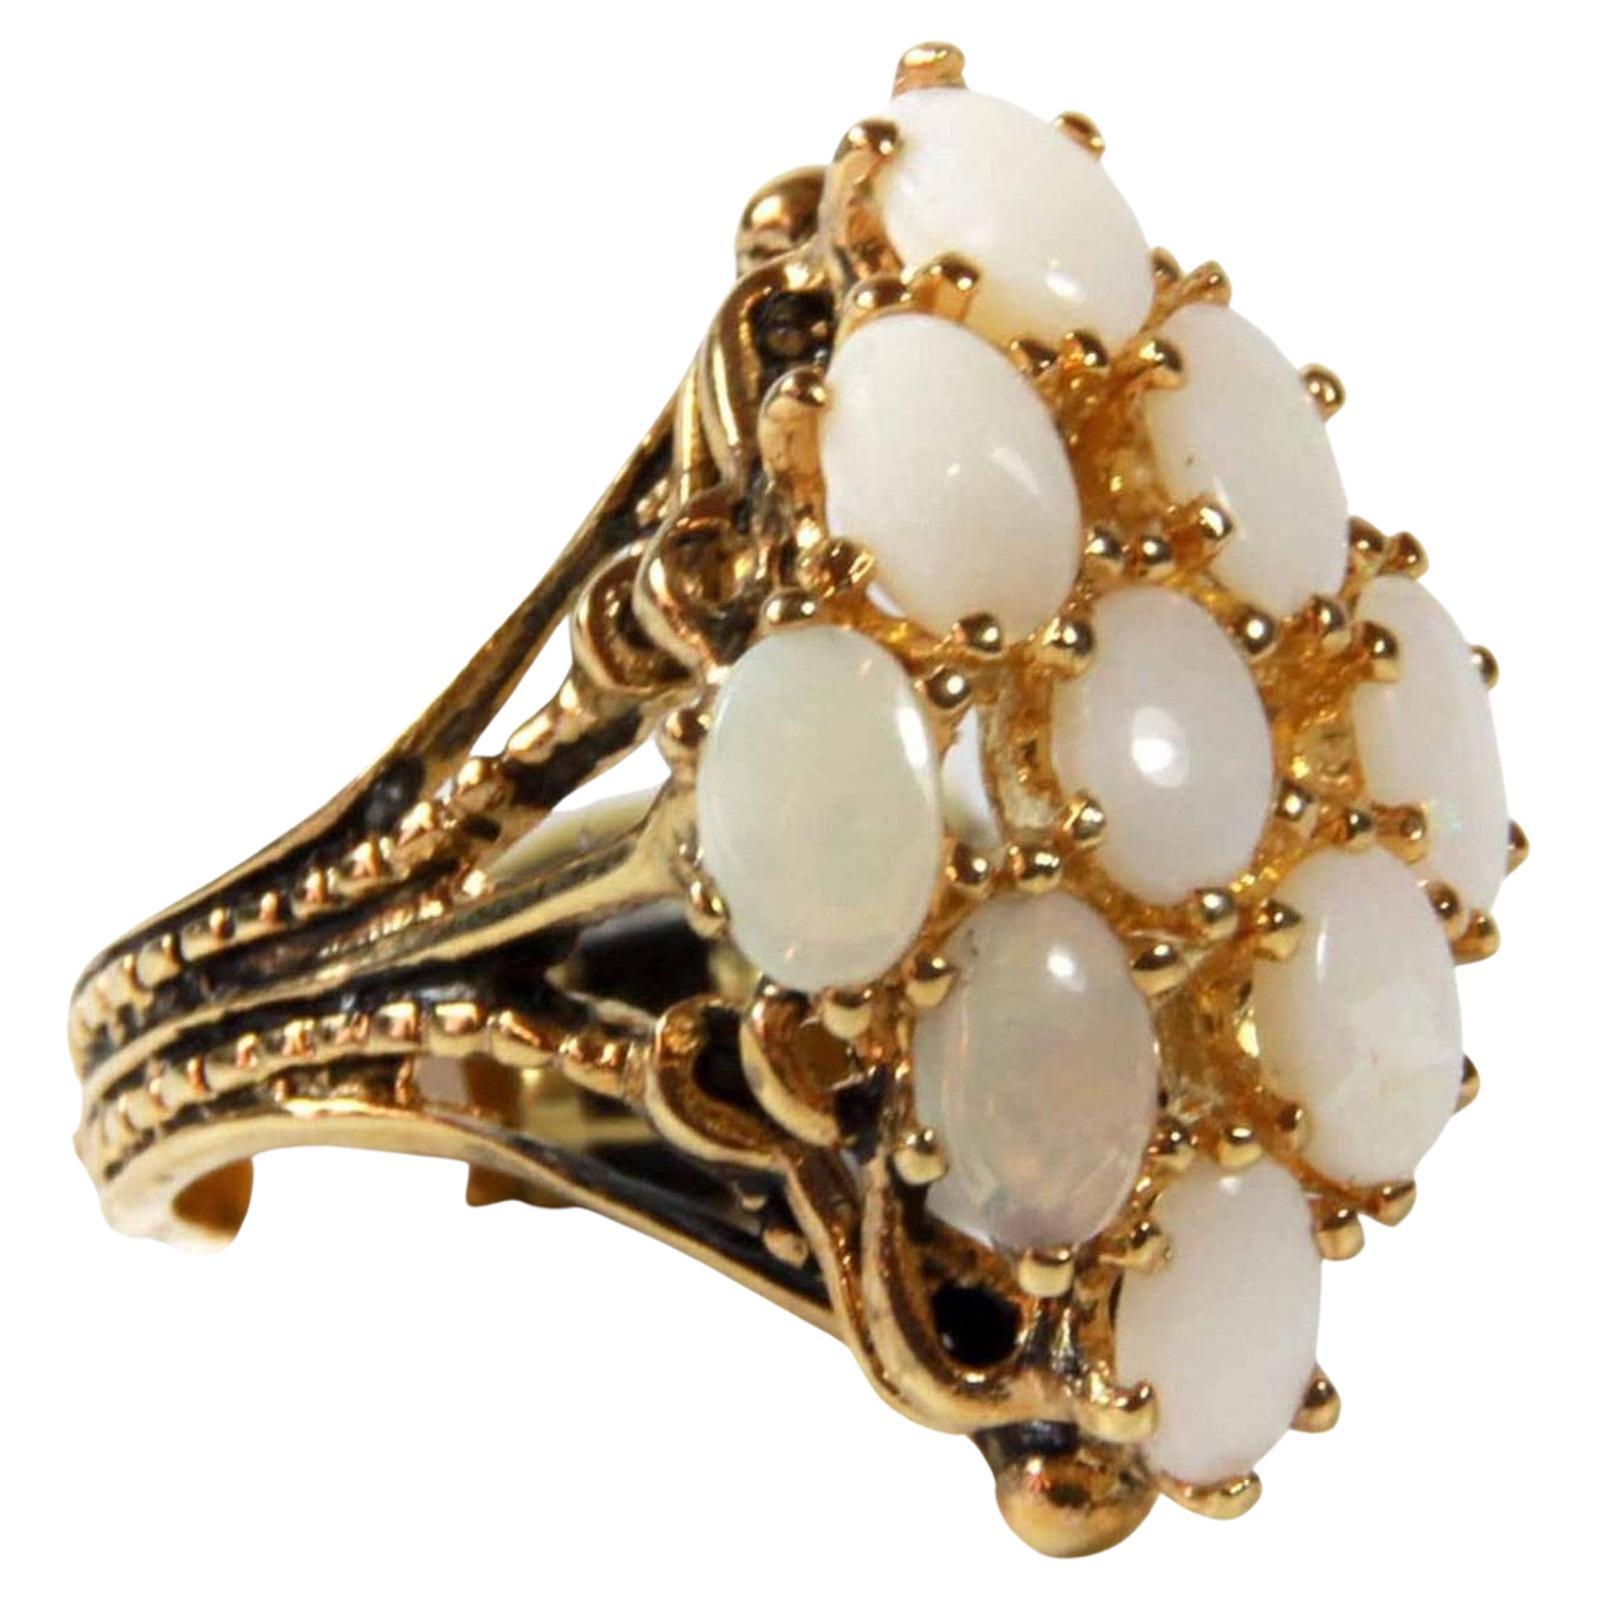 Chic yet, charming this antiqued genuine opal cocktail is sure to catch the attention by making a statement, whether you are dressed up or dressed down this statement ring will certainly, lend you give a polished look!

Made by the American ring